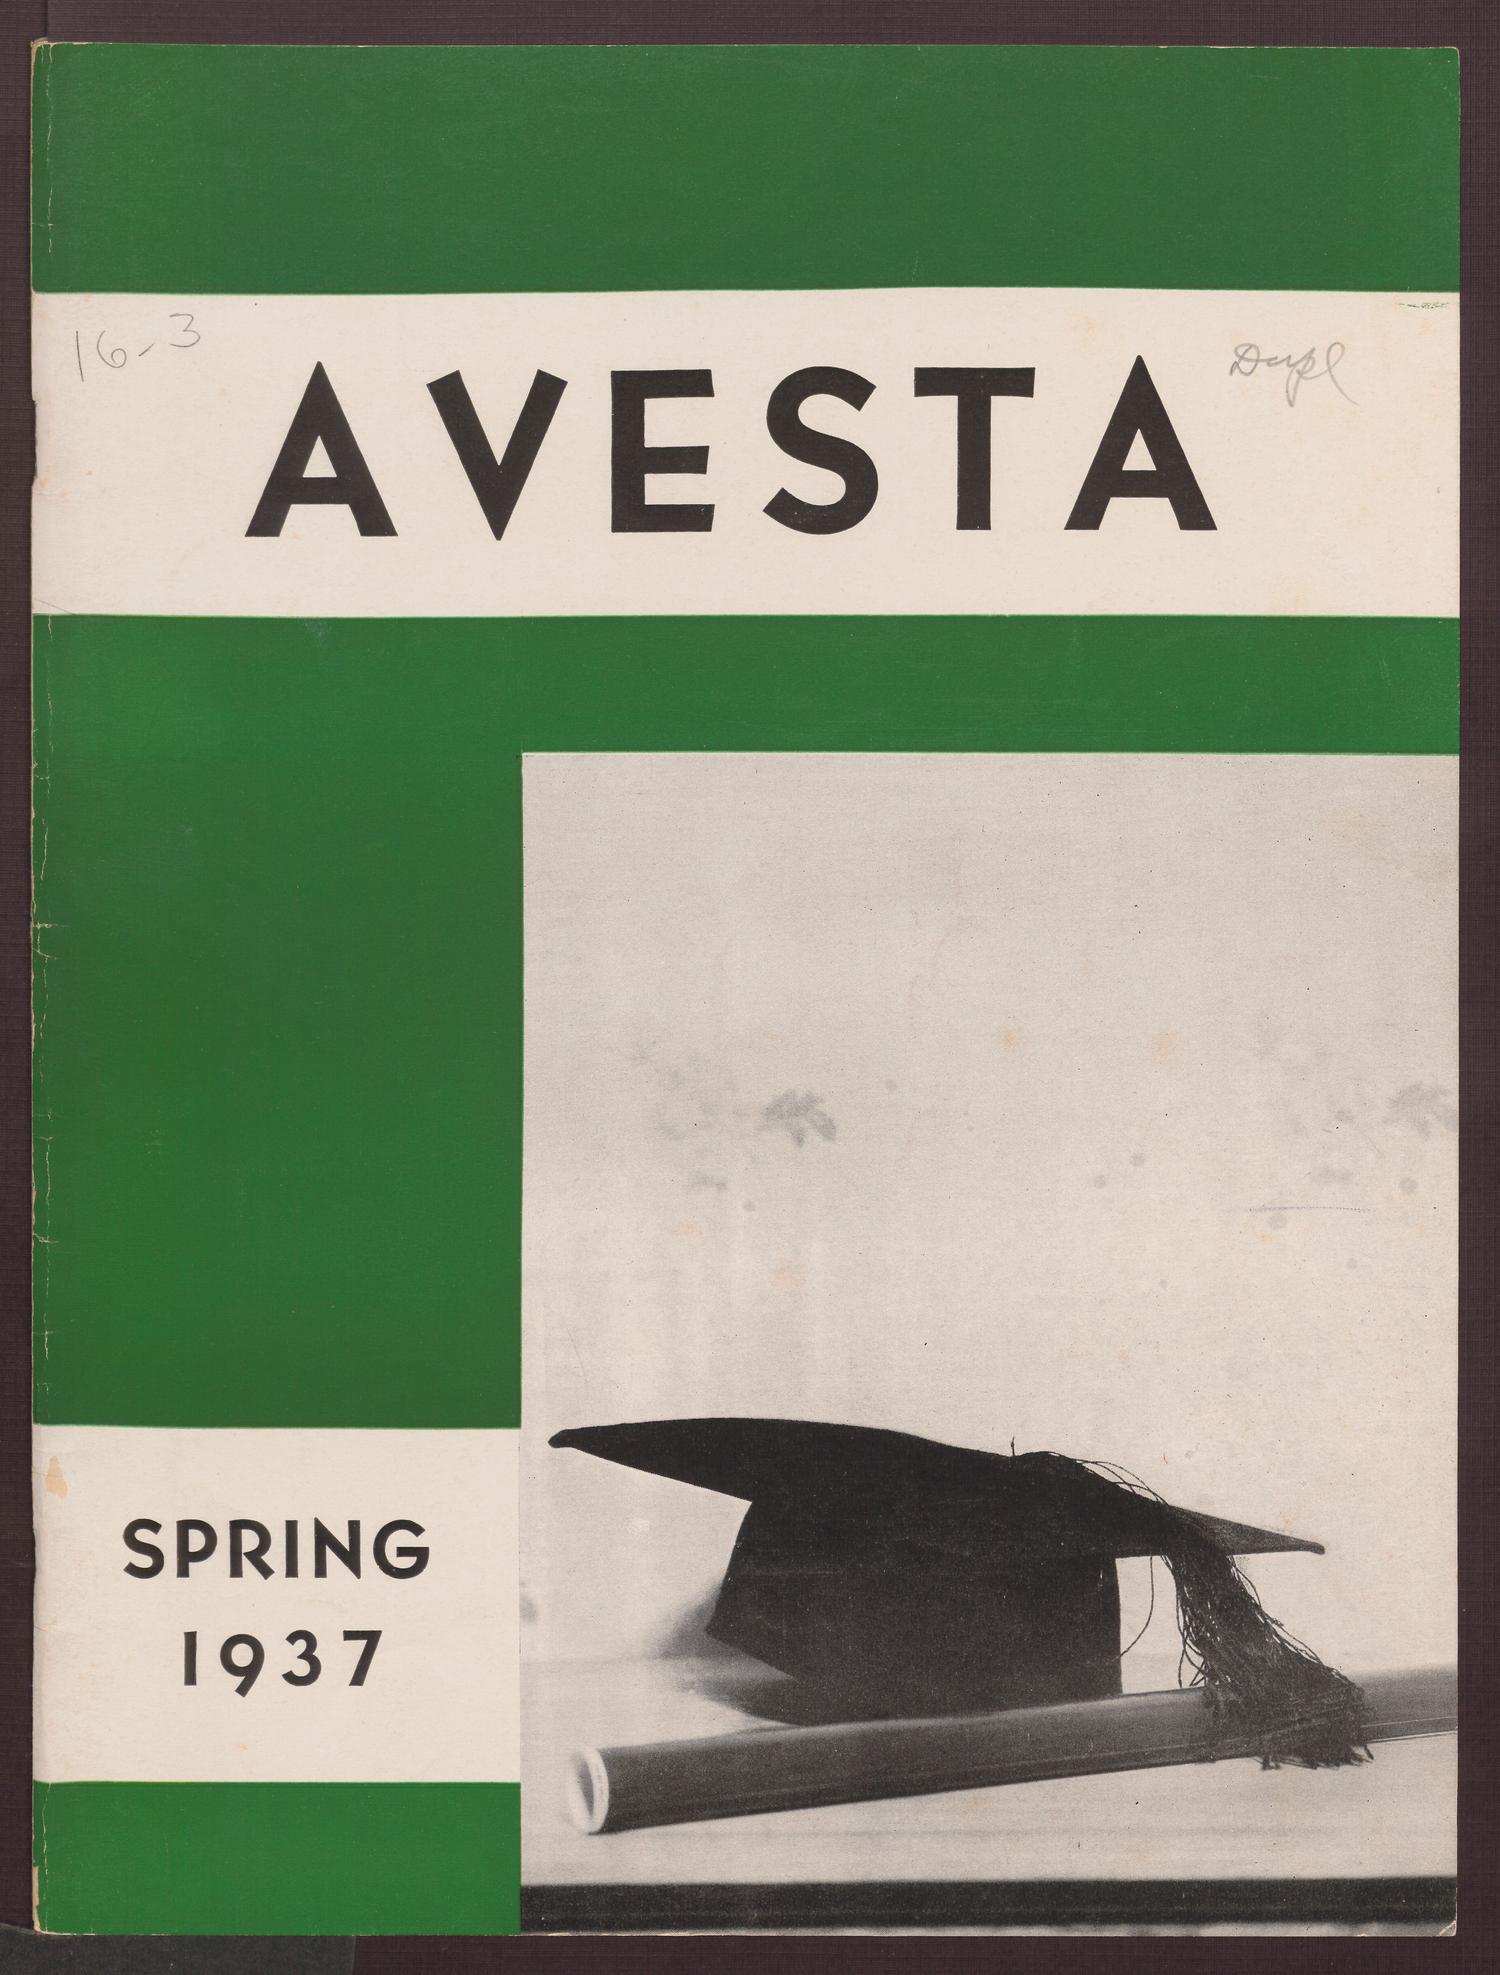 The Avesta, Volume 16, Number 3, Spring, 1937
                                                
                                                    Front Cover
                                                